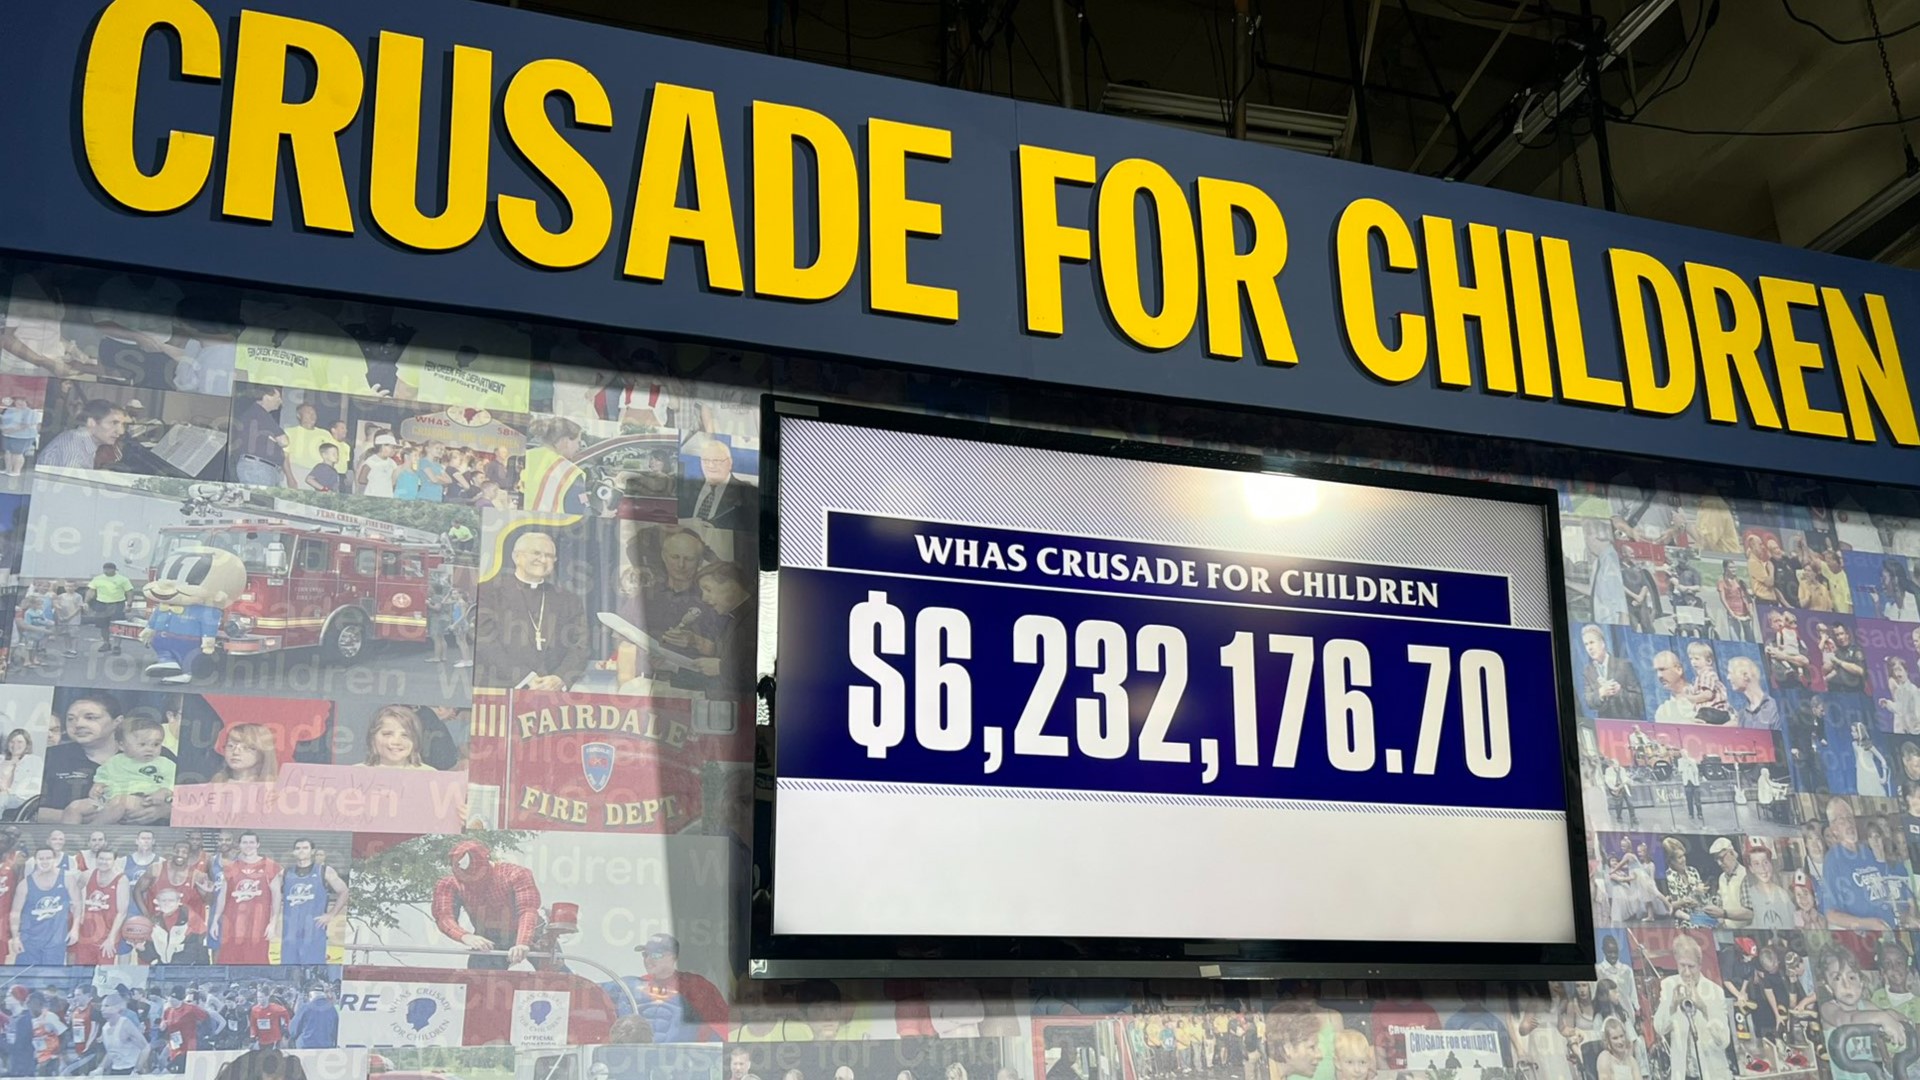 The WHAS Crusade for Children entered its 8th decade with the performance of a lifelong tradition.